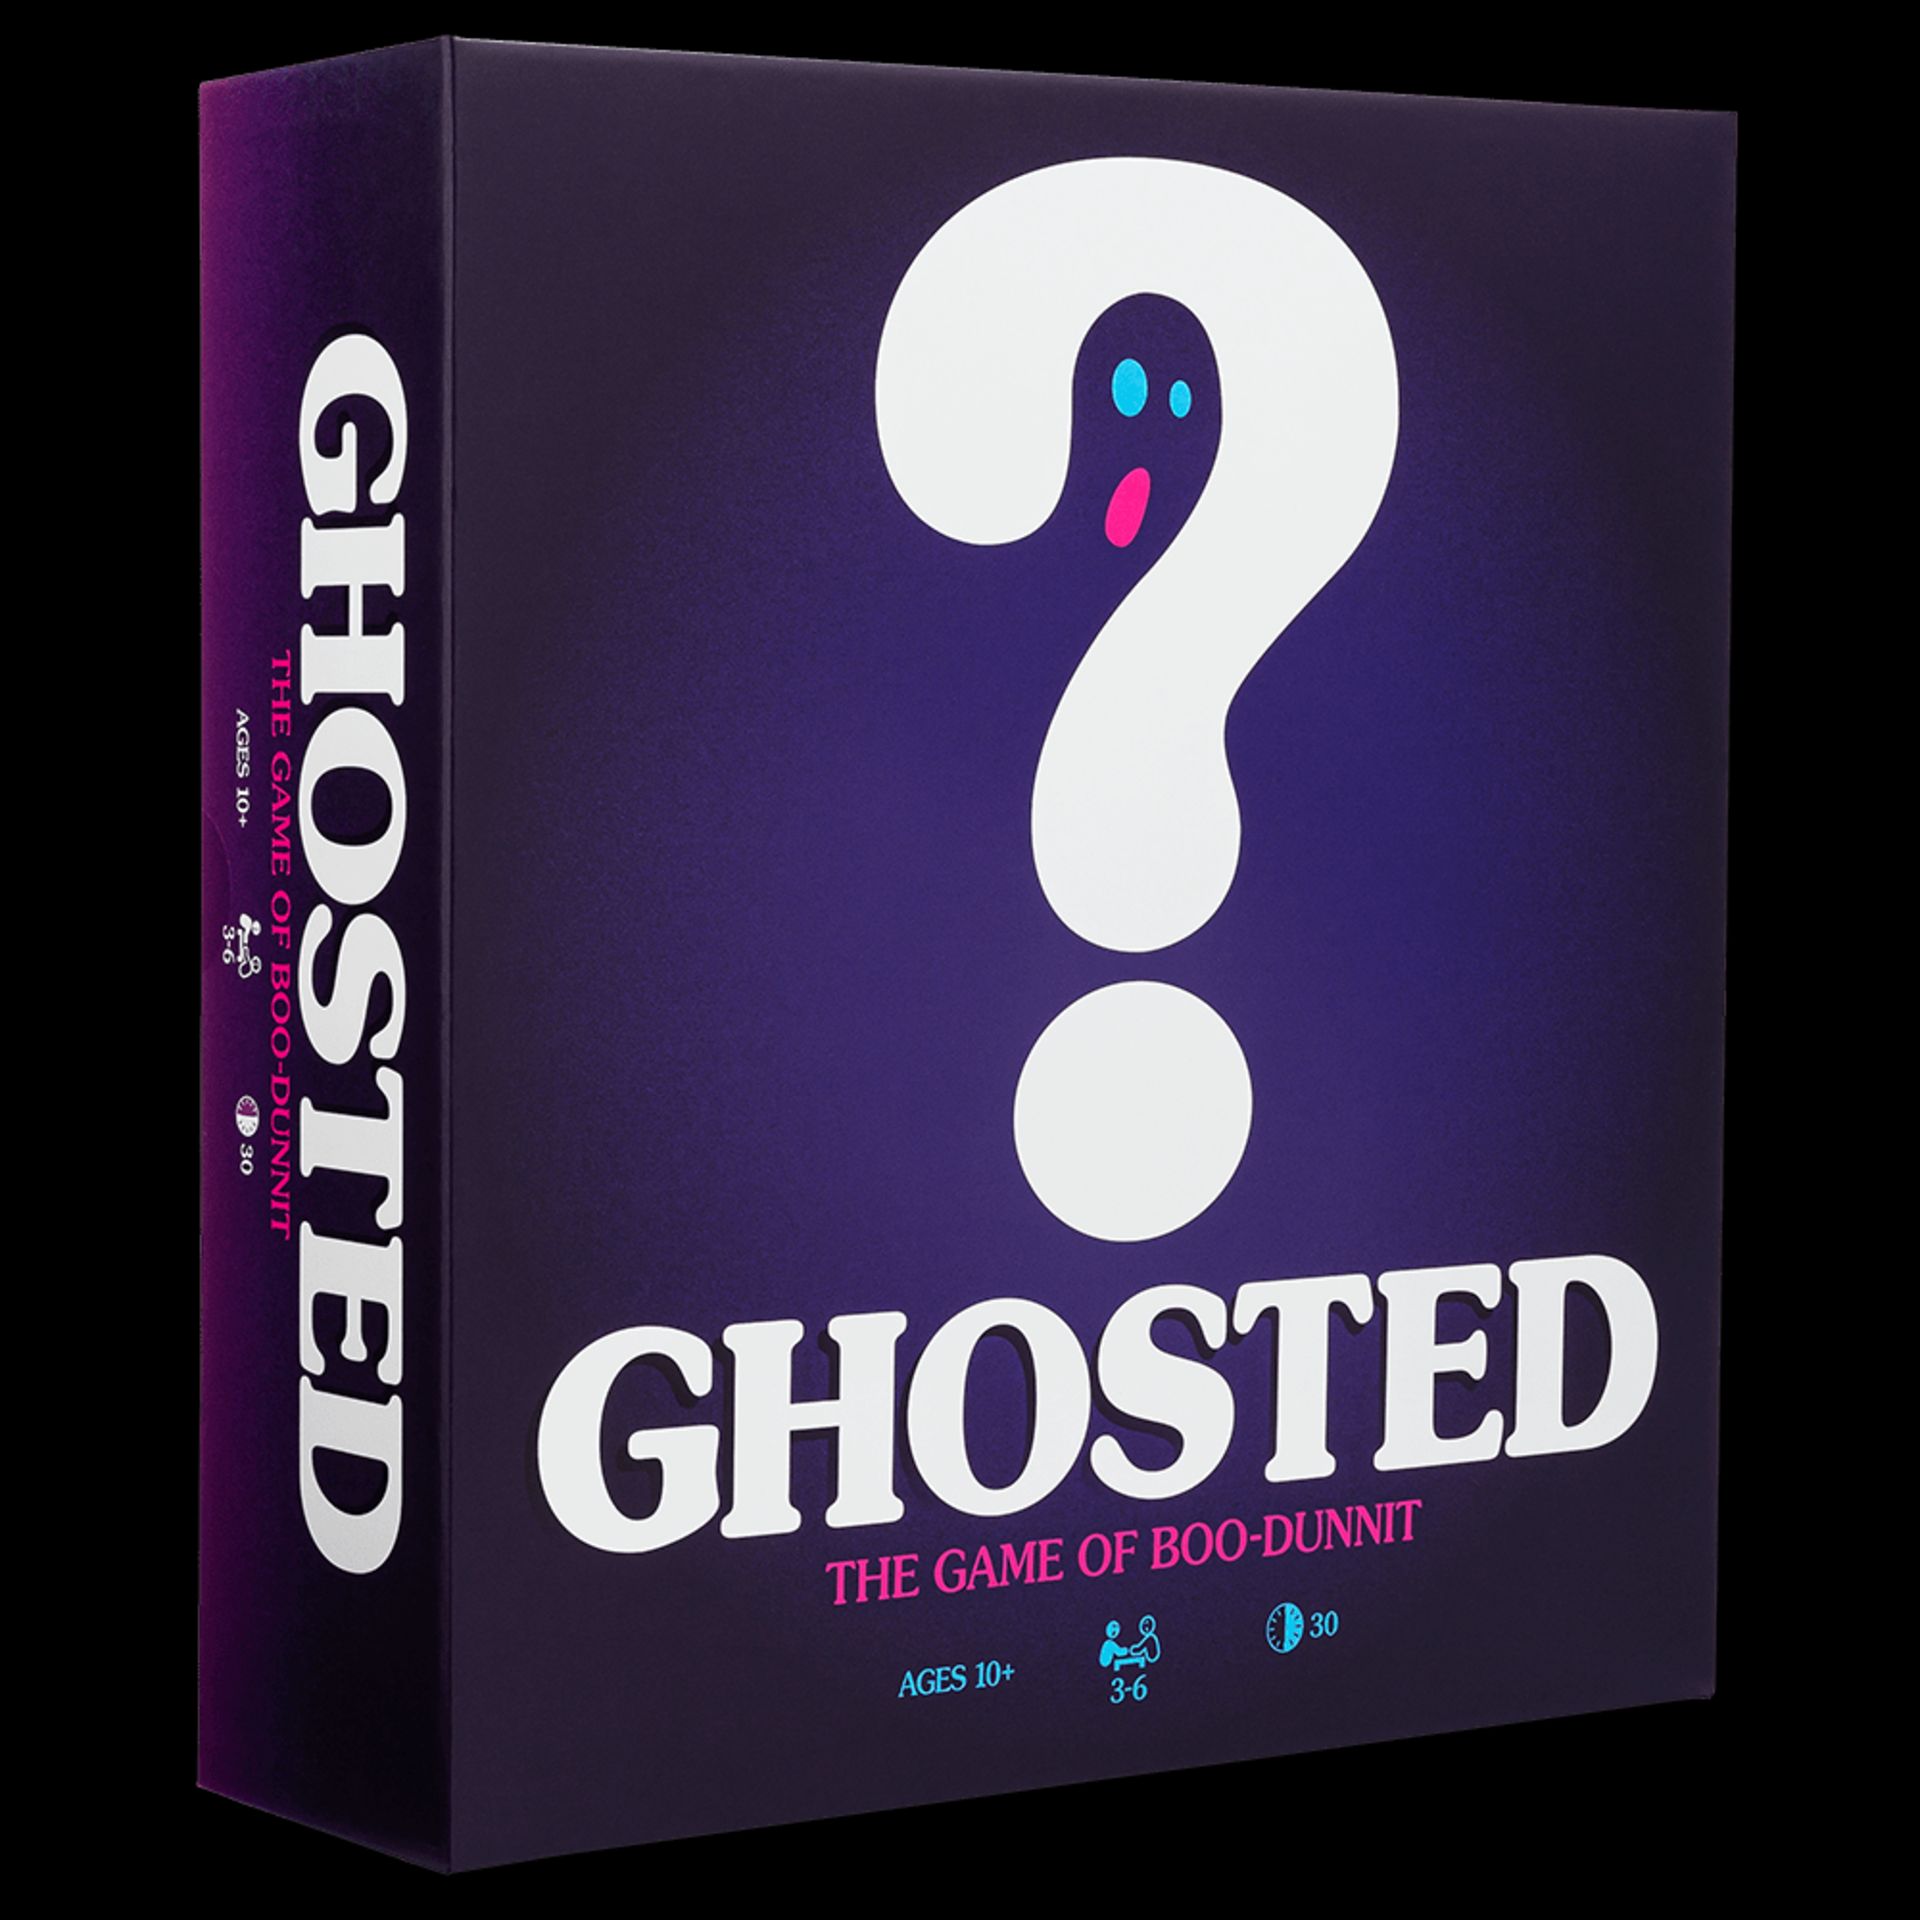 40 X NEW GHOSTED GAME